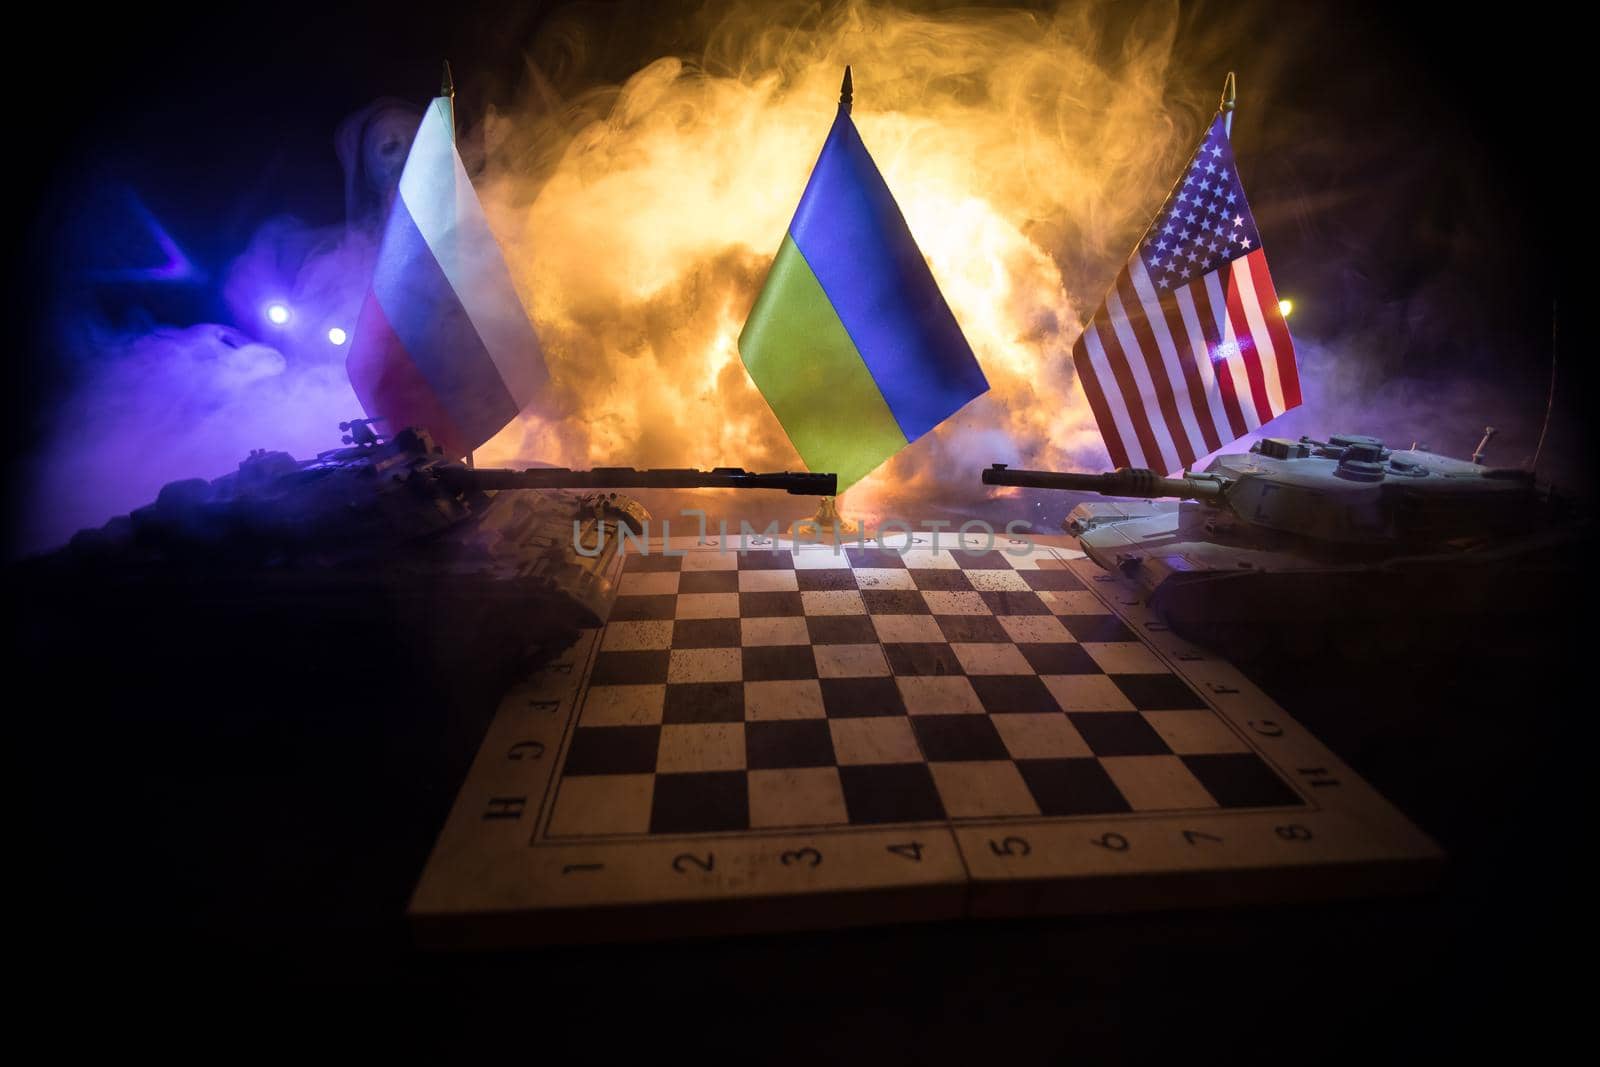 War between Russia and Ukraine, conceptual image of war using chess board and national flags on the background of explosion. Ukrainian and Russian crisis, political conflict. Selective focus